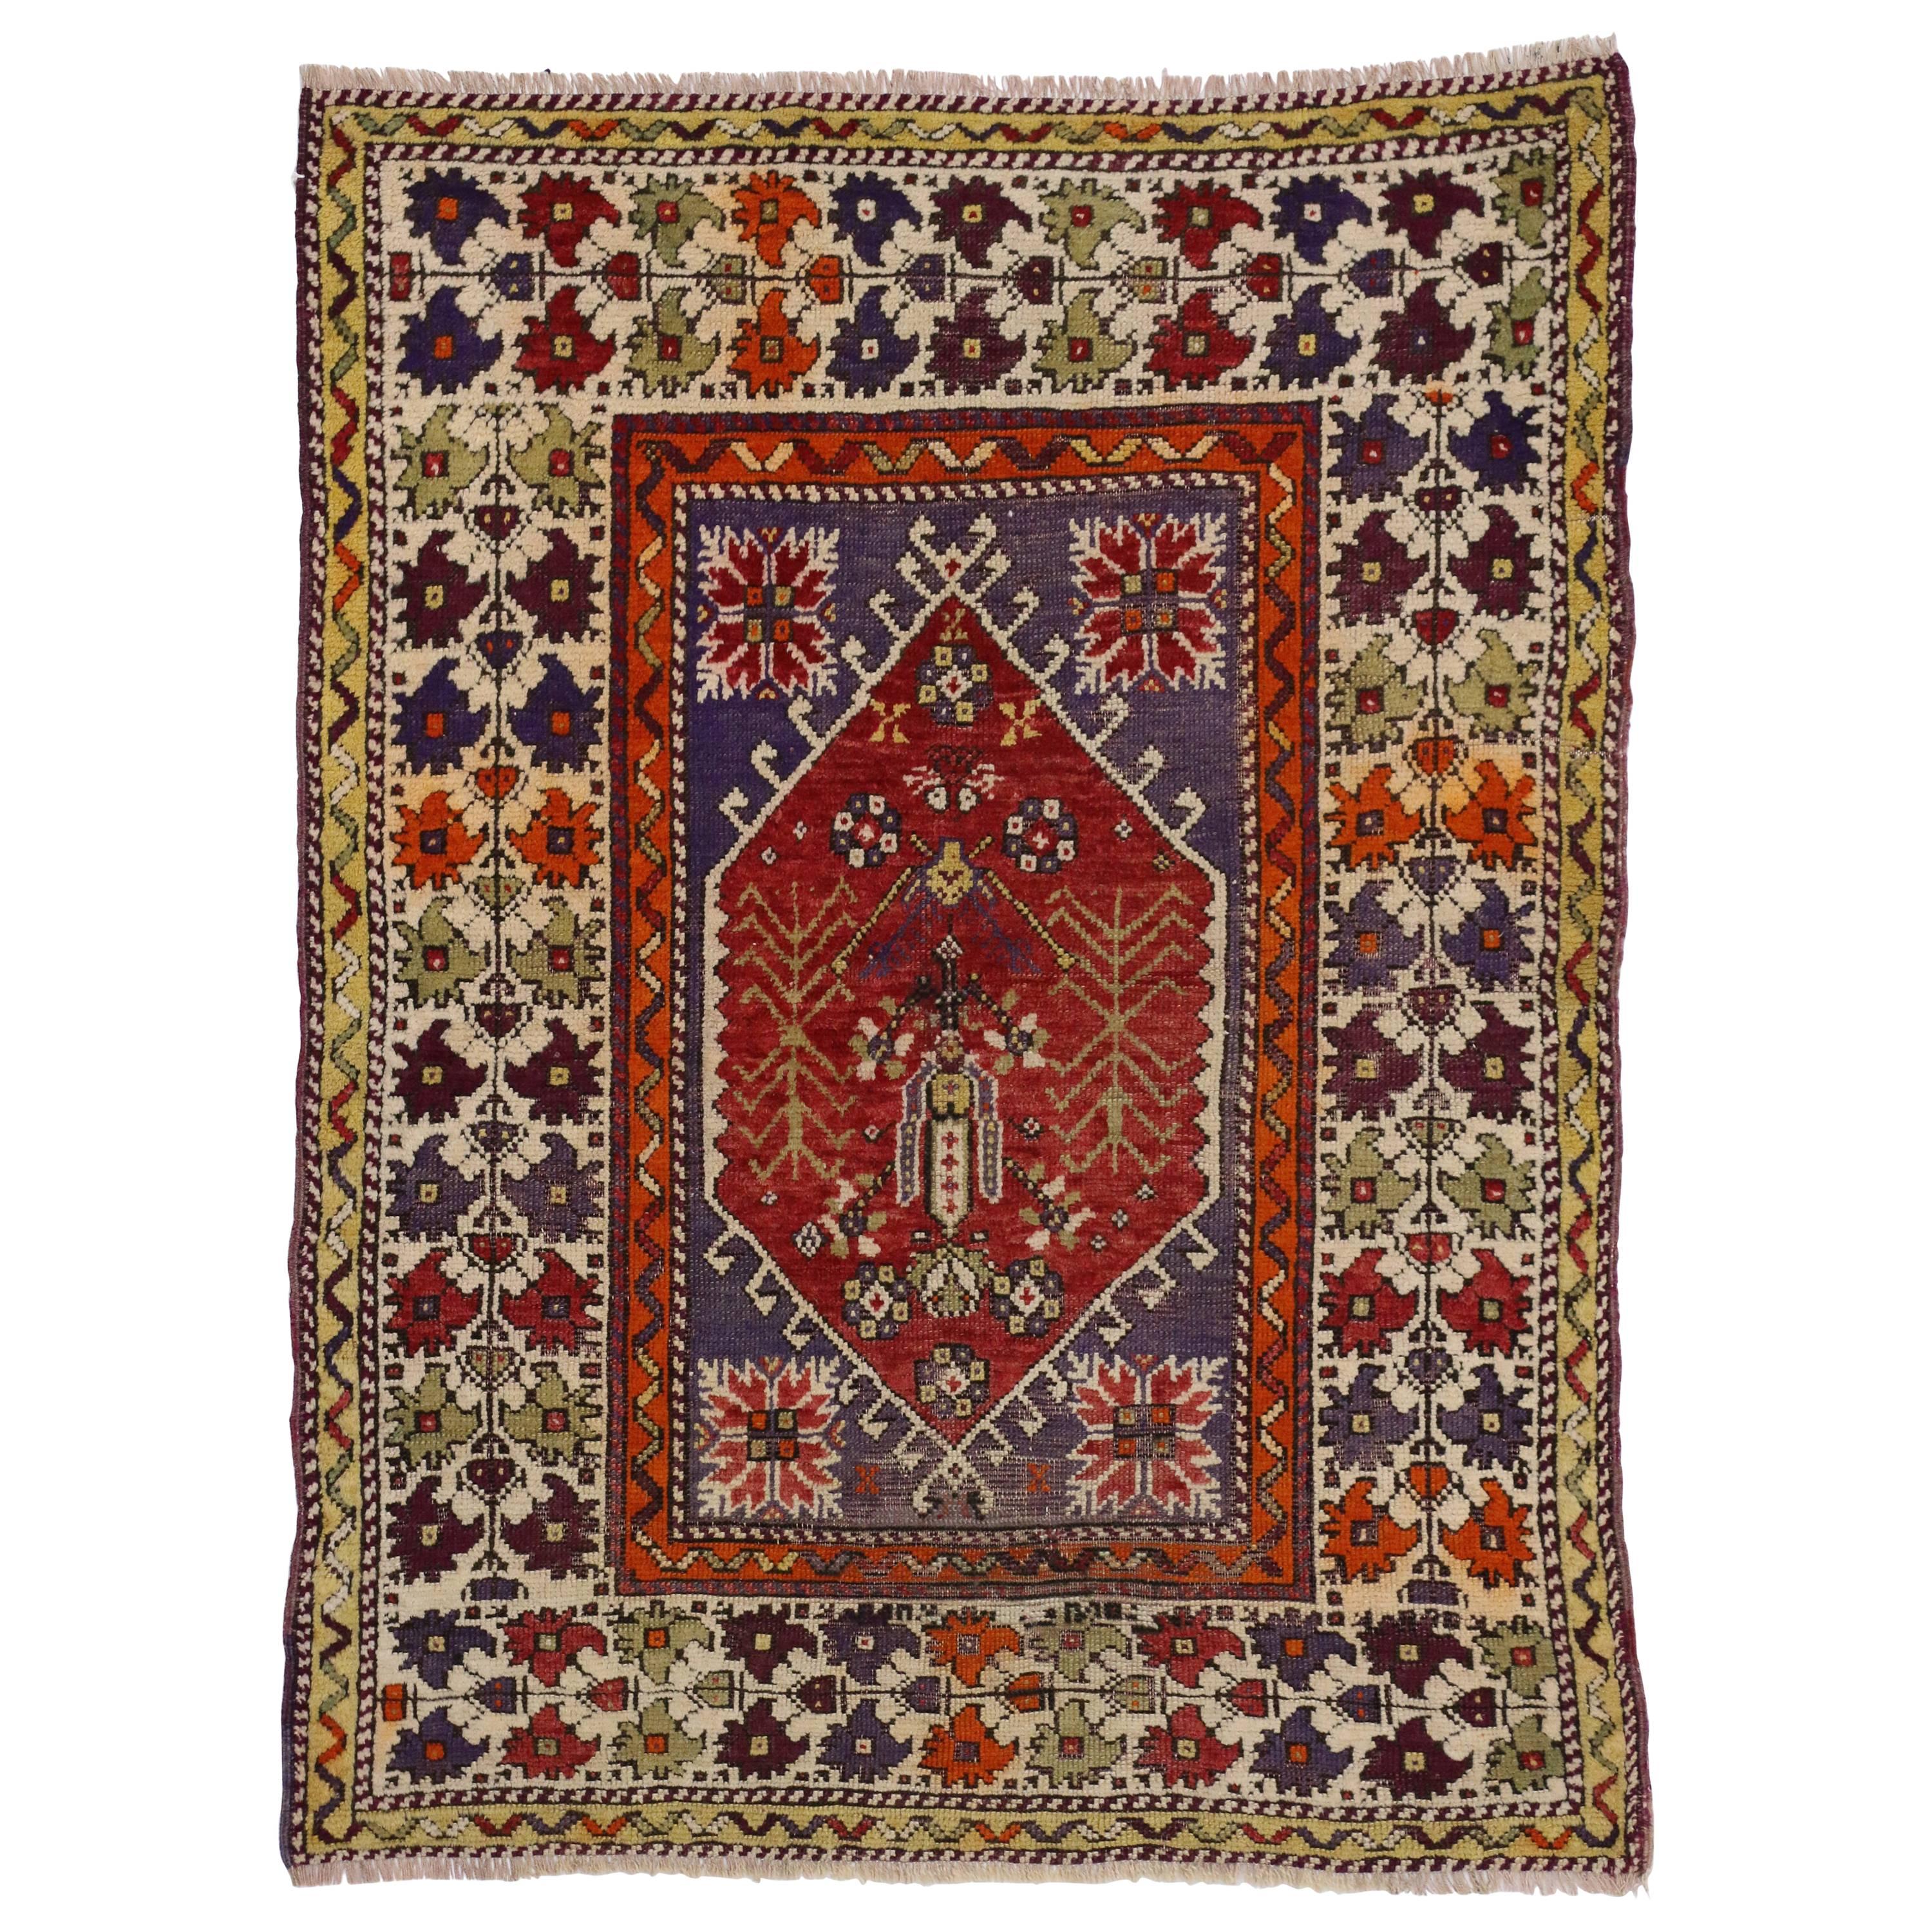 Vintage Turkish Oushak Rug with Modern Traditional Style